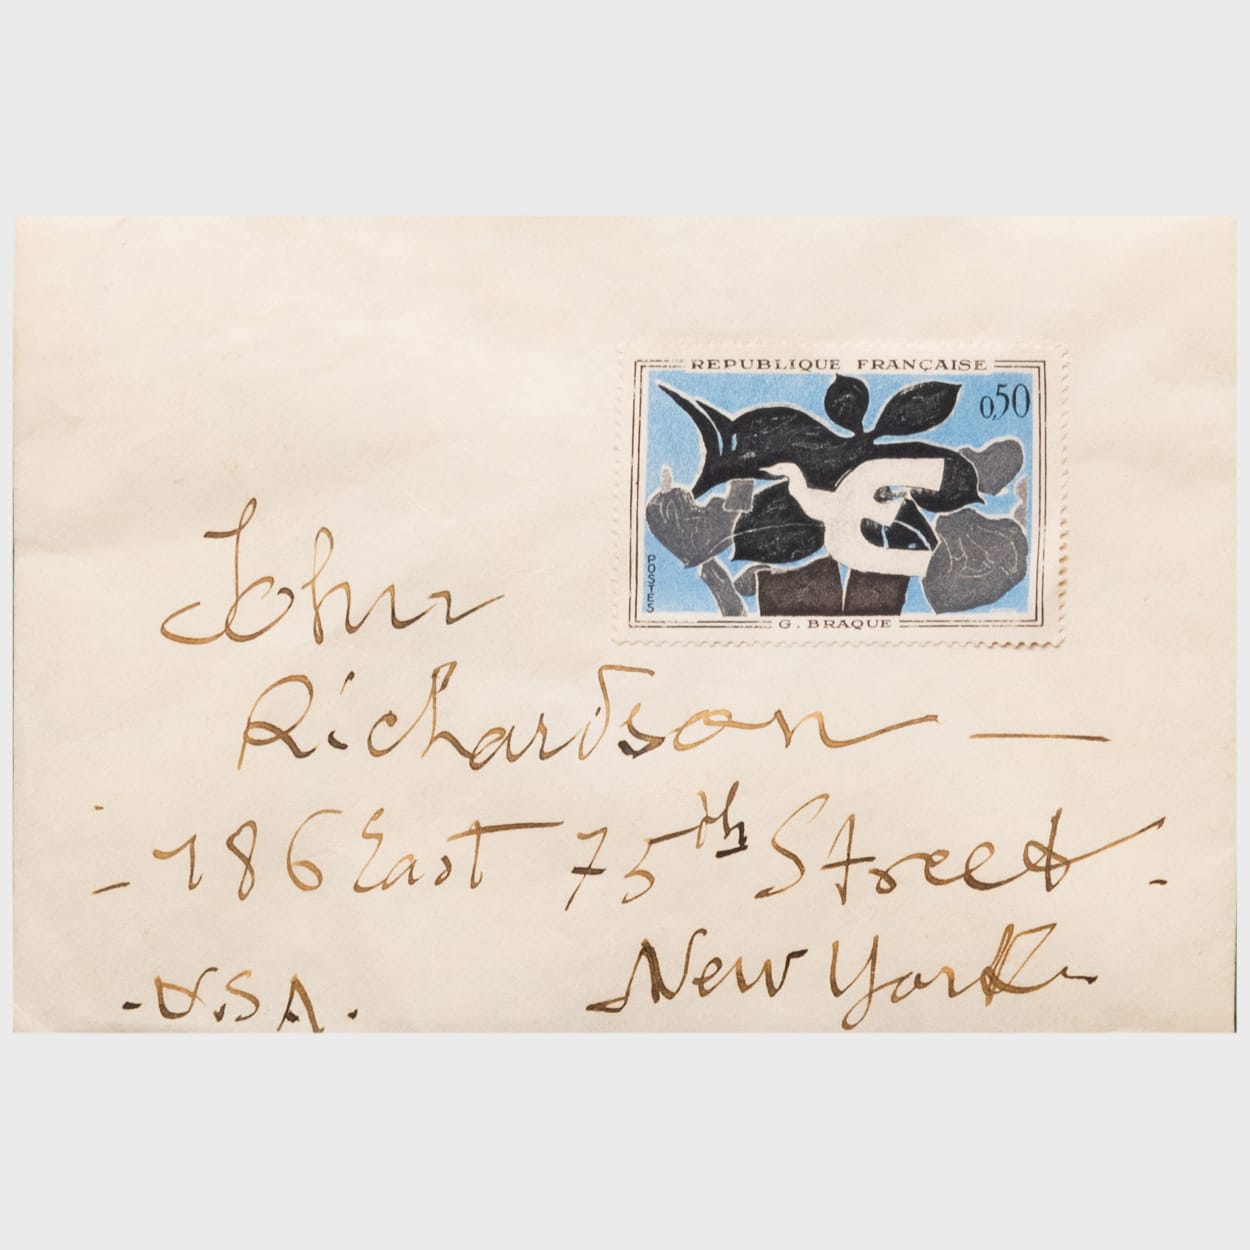 after George Braque - Postage Stamp of “The Messenger”